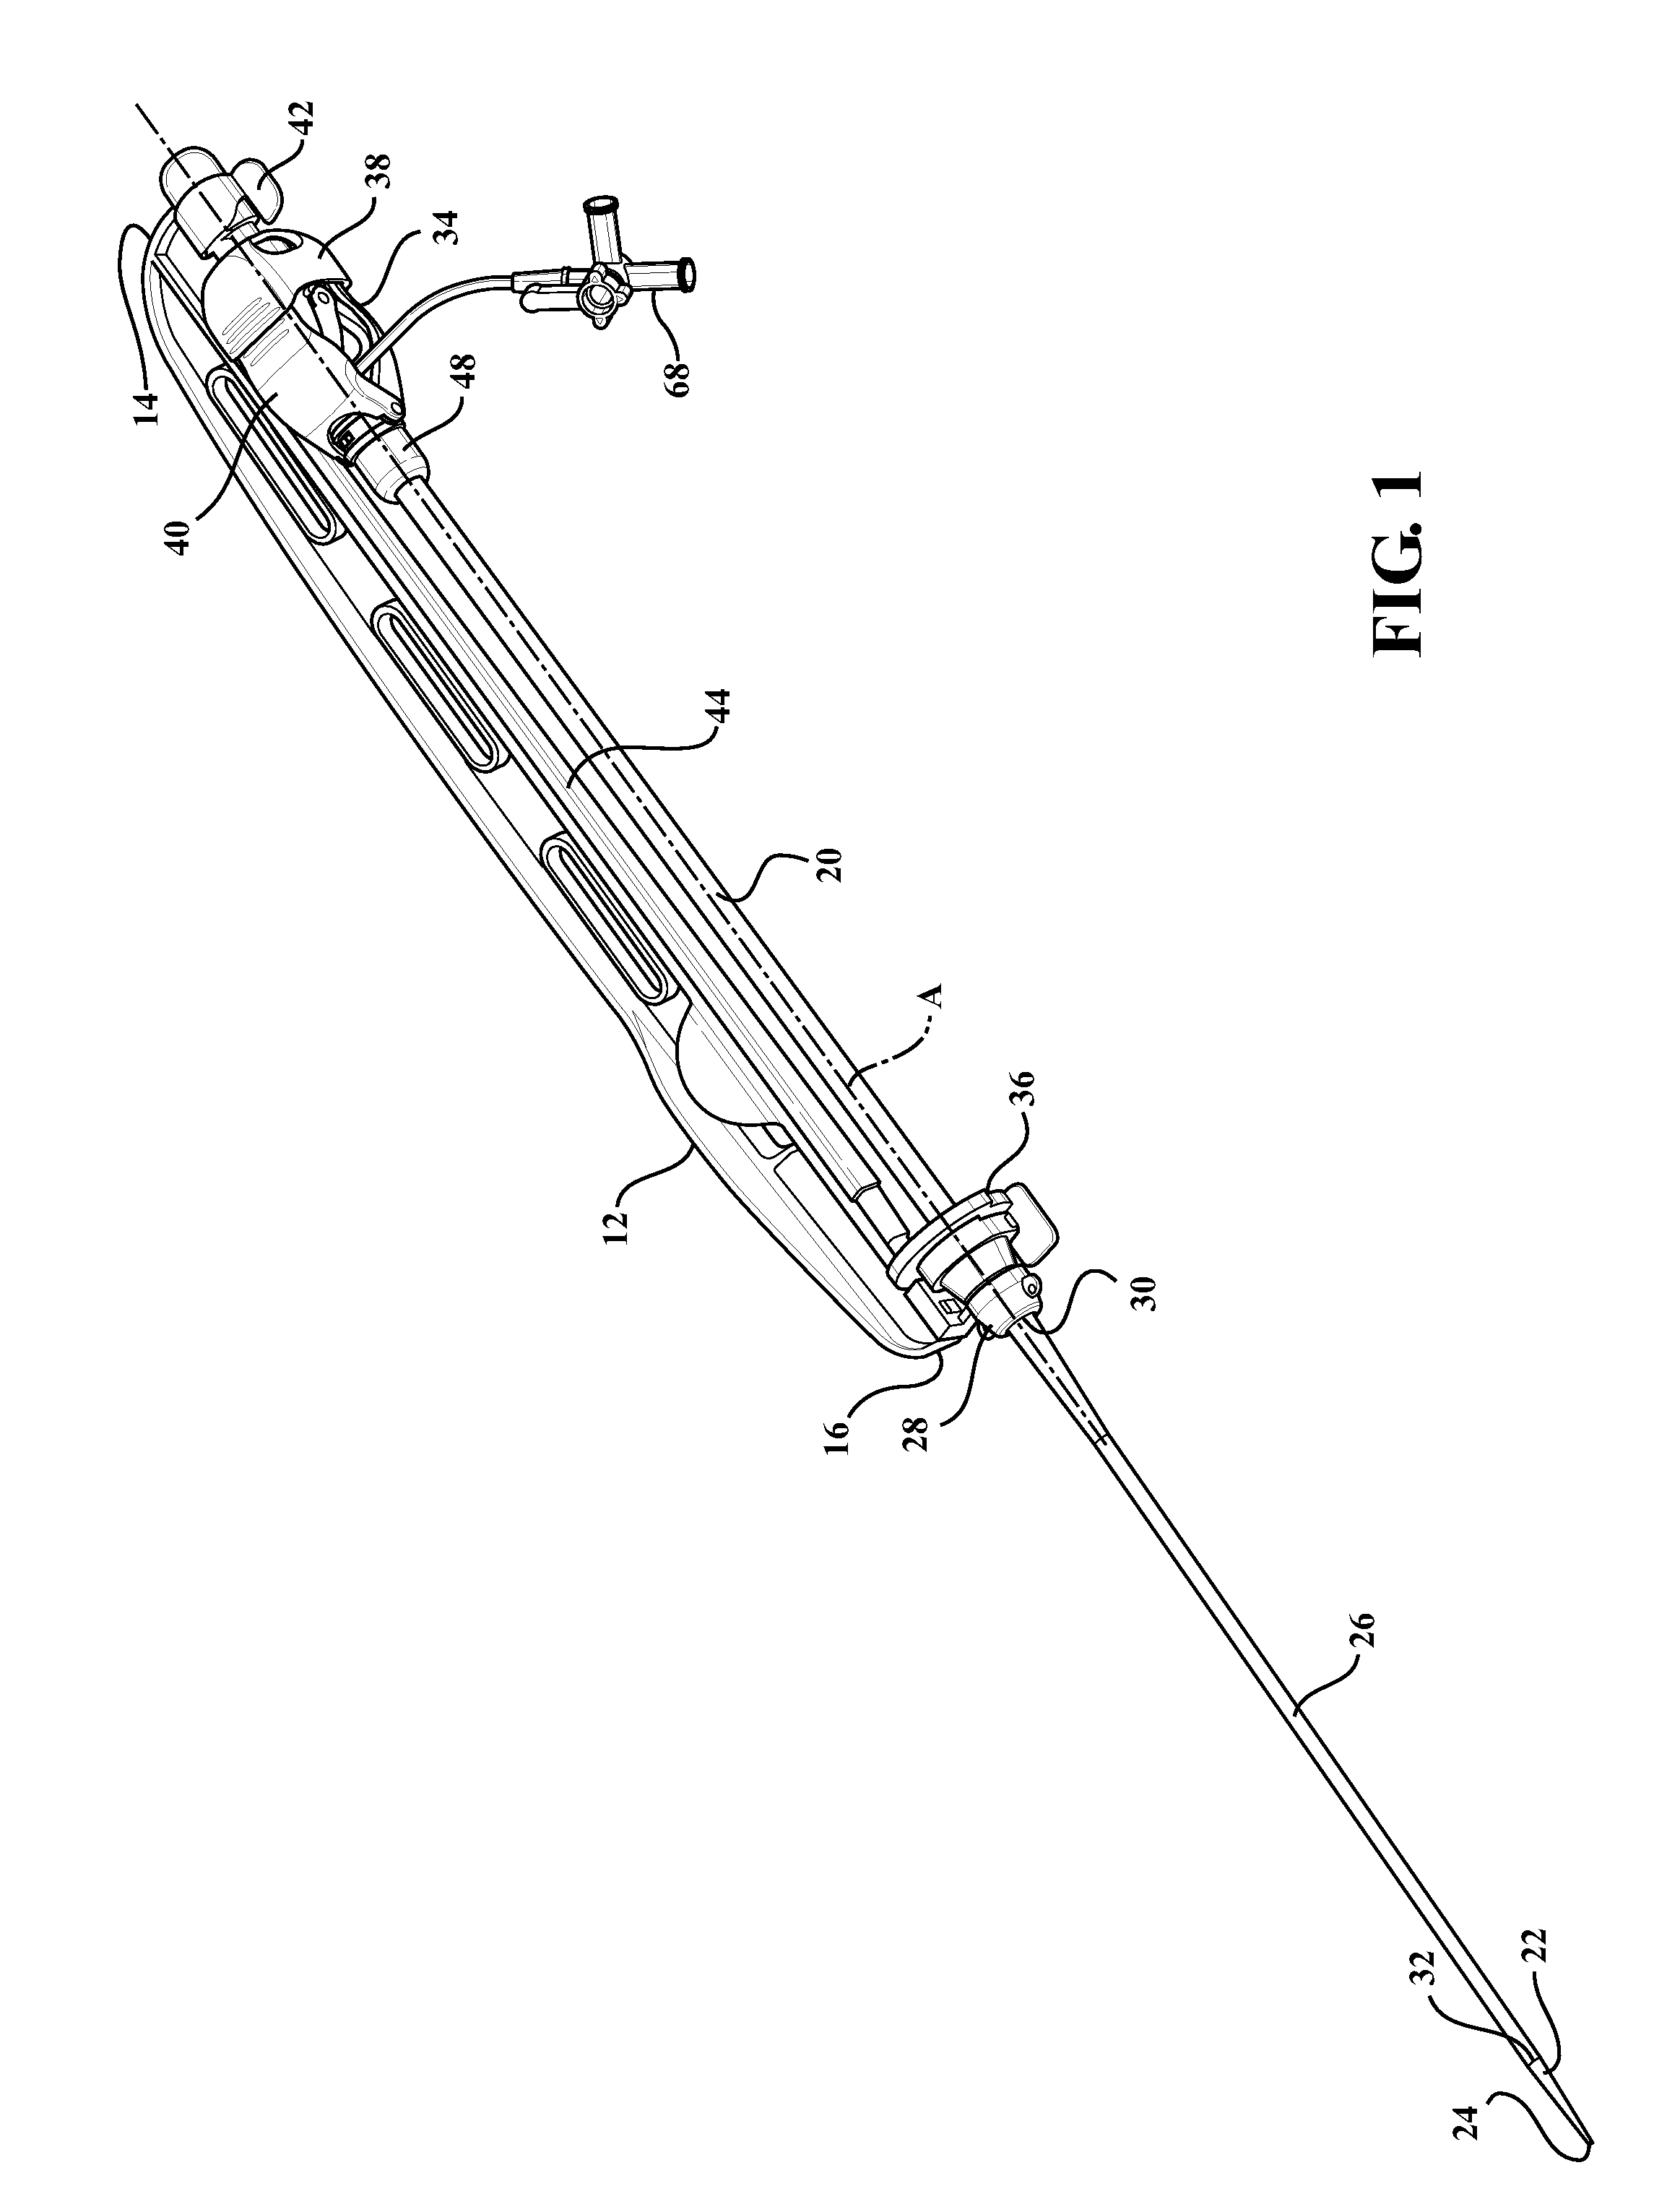 Expandable sheath assembly and method of using same